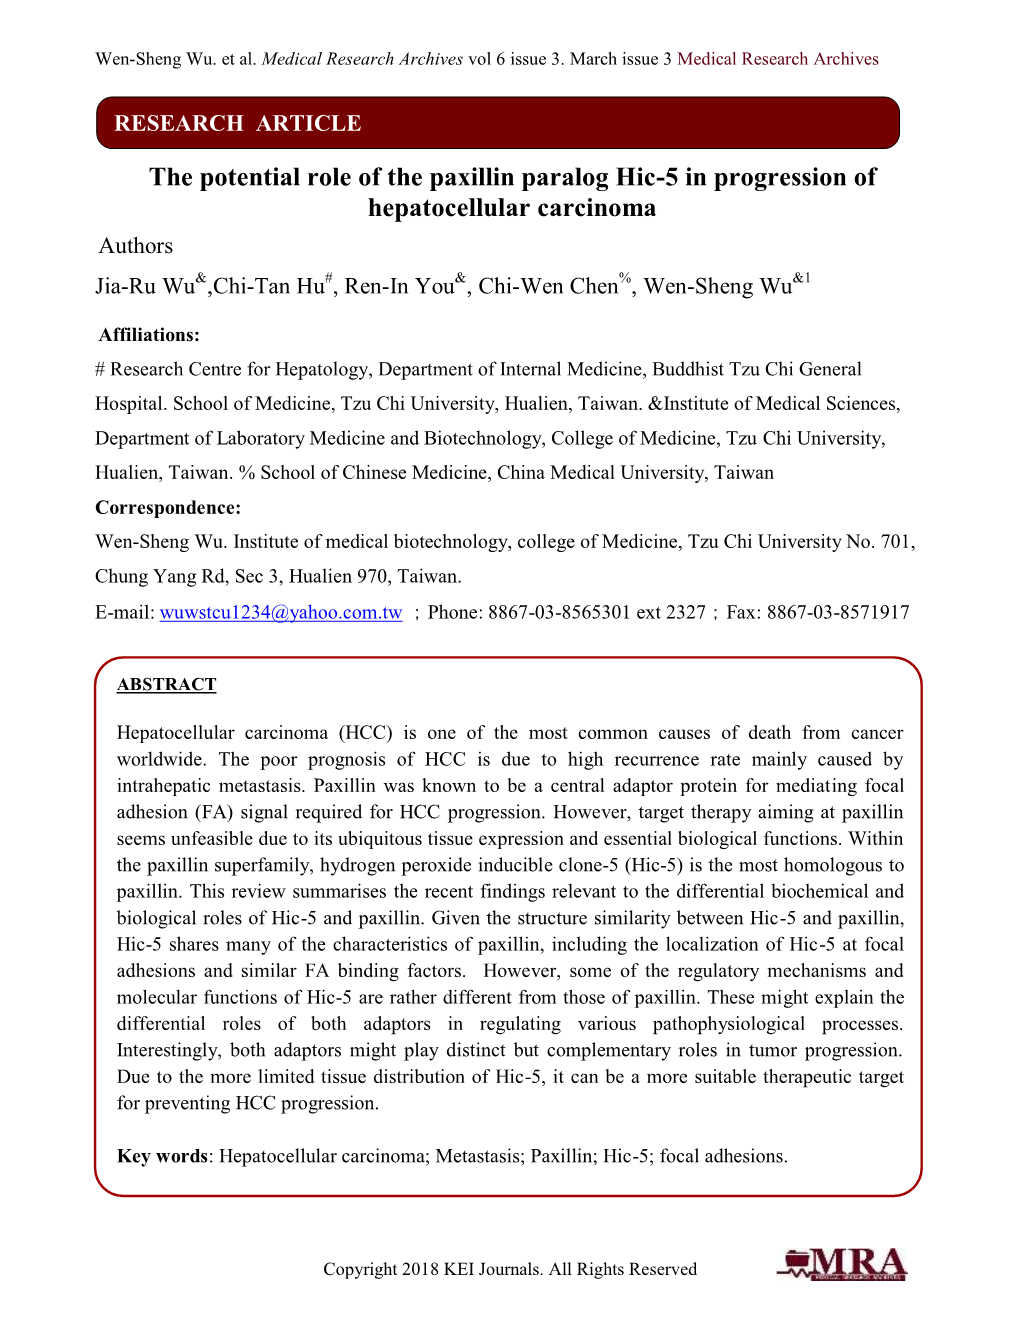 The Potential Role of the Paxillin Paralog Hic-5 in Progression Of